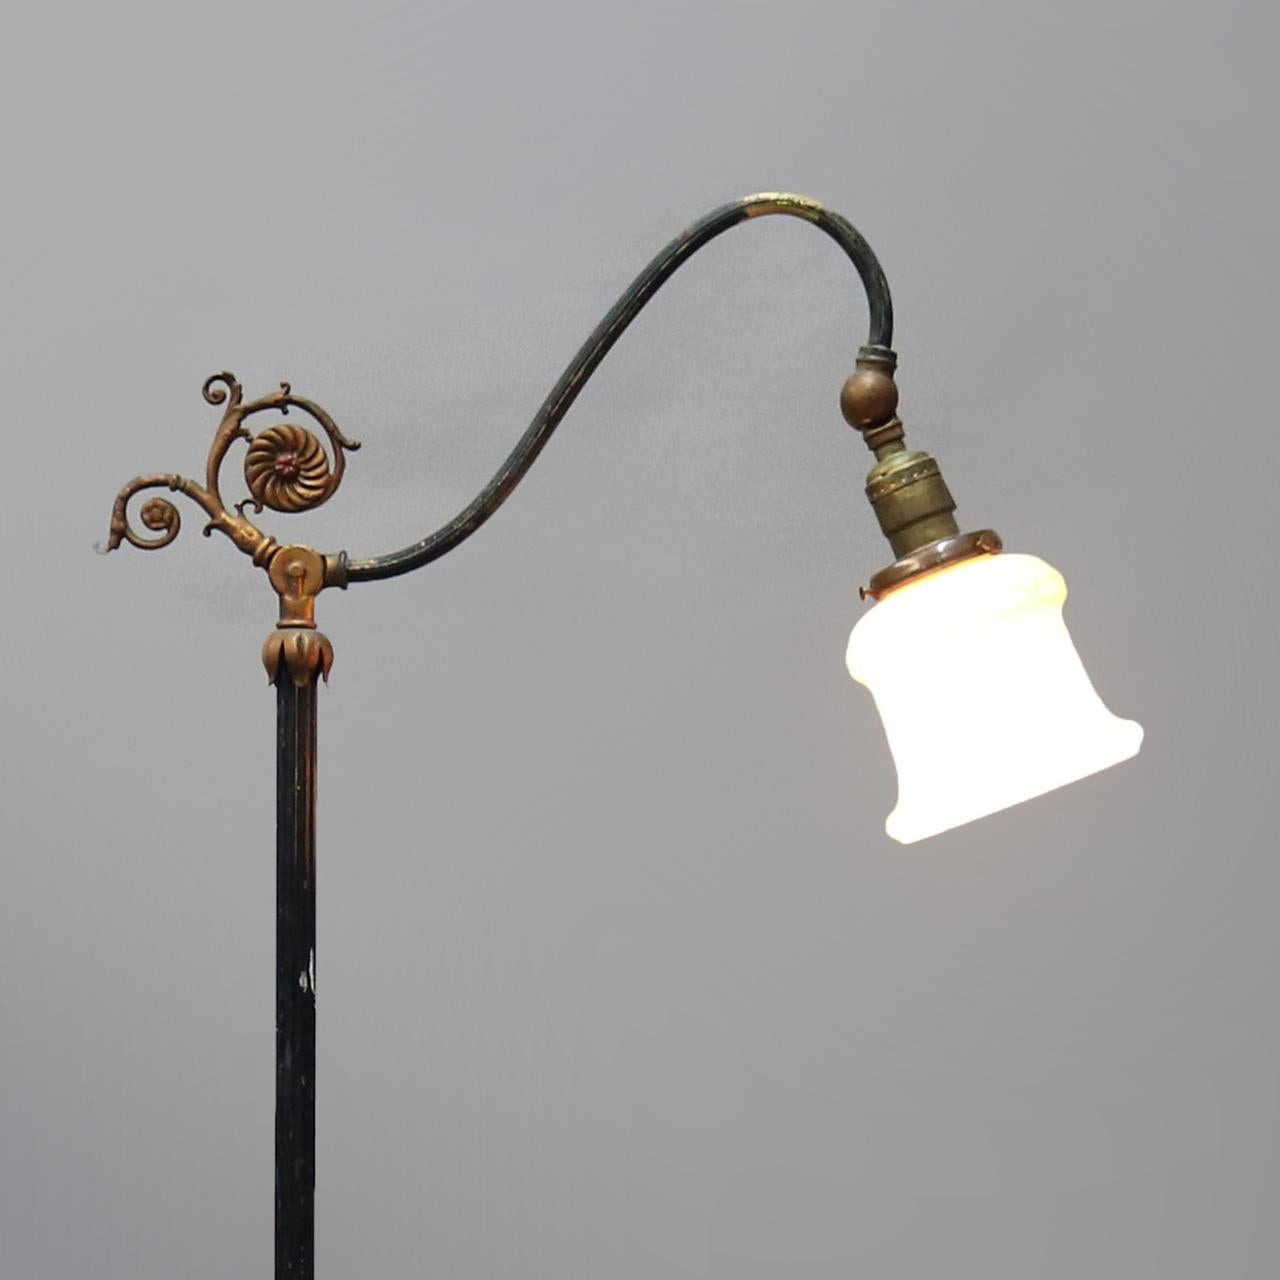 An antique English bridge floor lamp offers scroll form goose neck terminating in adjustable light and raised on cast foliate decorated column base, professionally rewired, circa 1920

Measures: 58.5